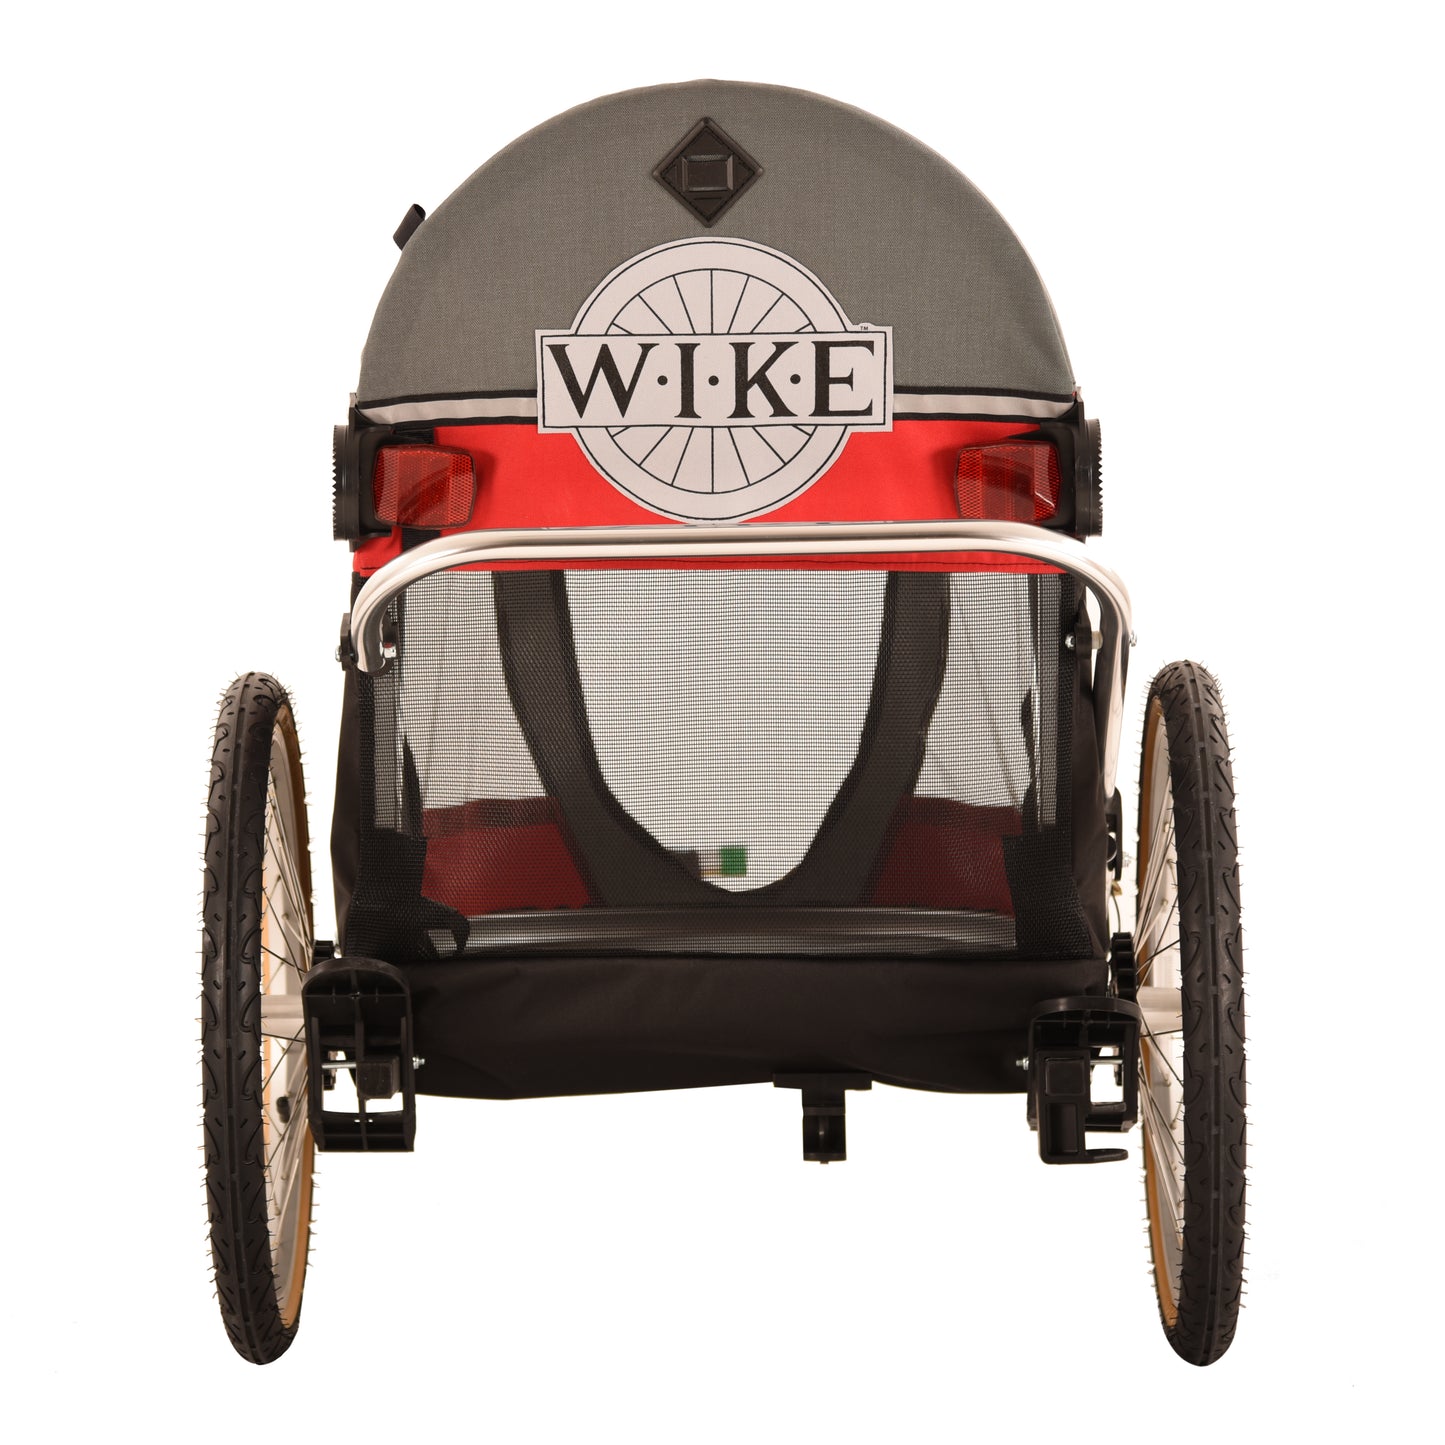 Wagalong Pet Trailer - Includes Stroller and Jogging Kit - Red/Black